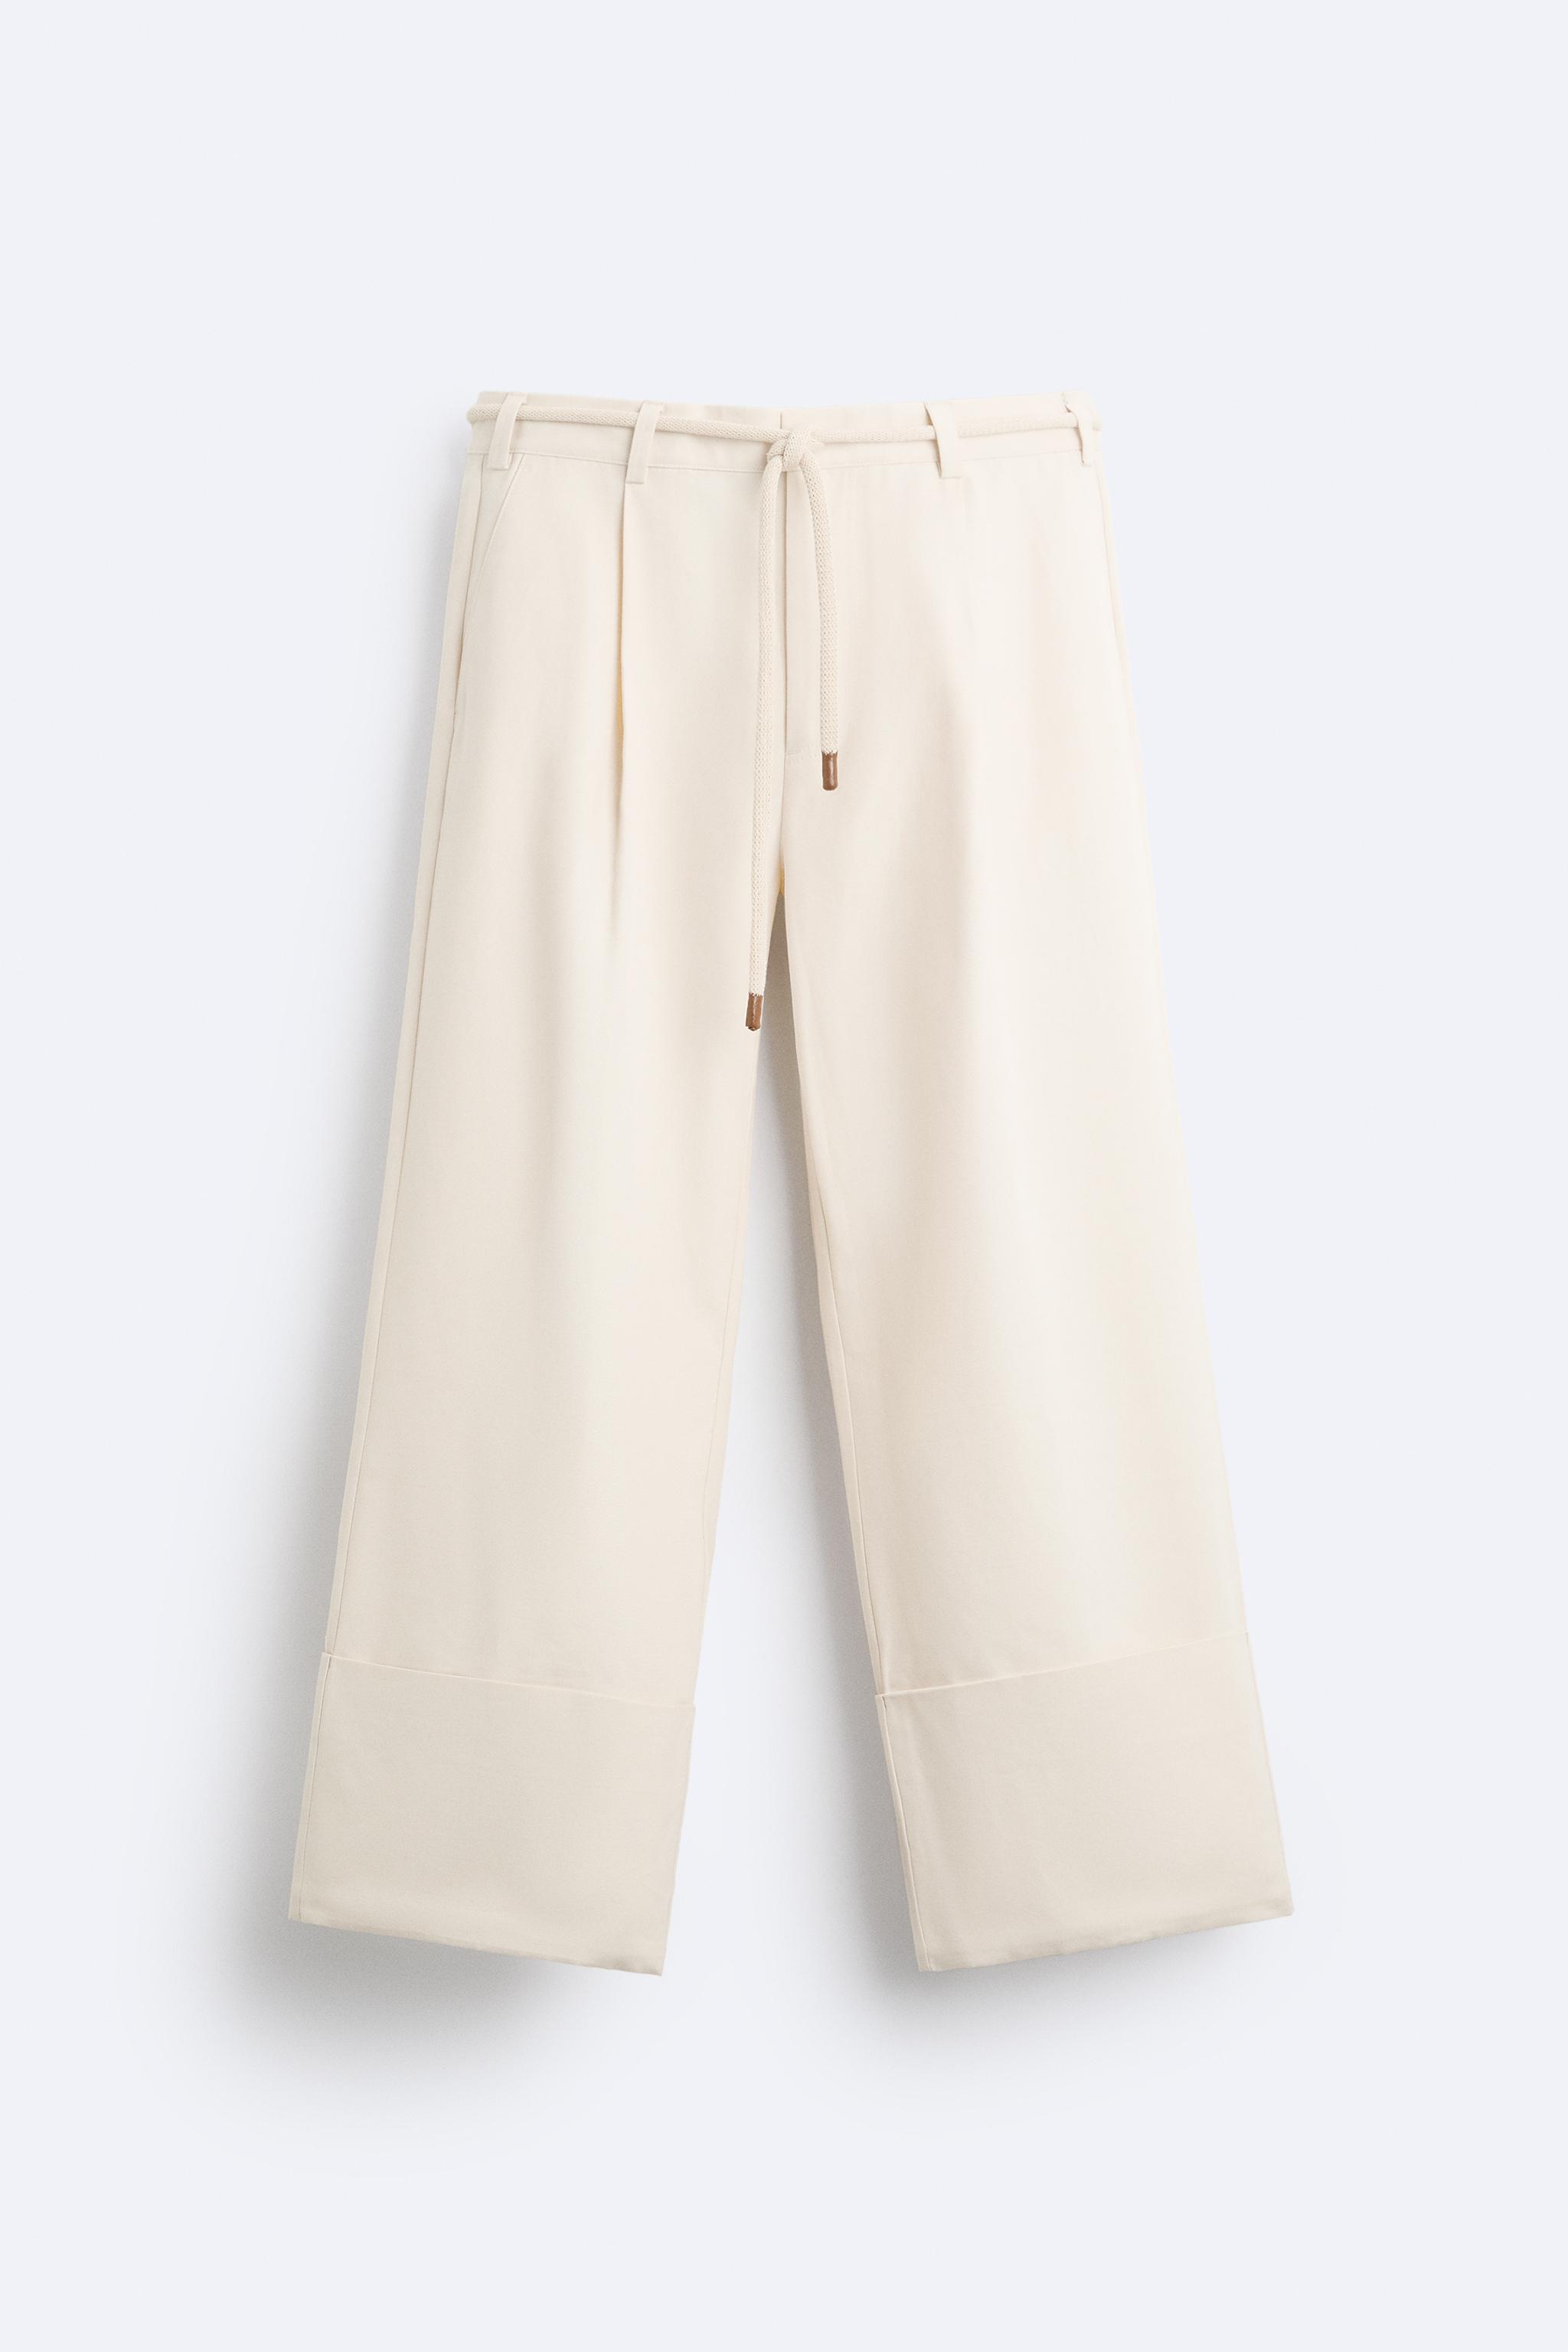 CUFFED PANTS LIMITED EDITION